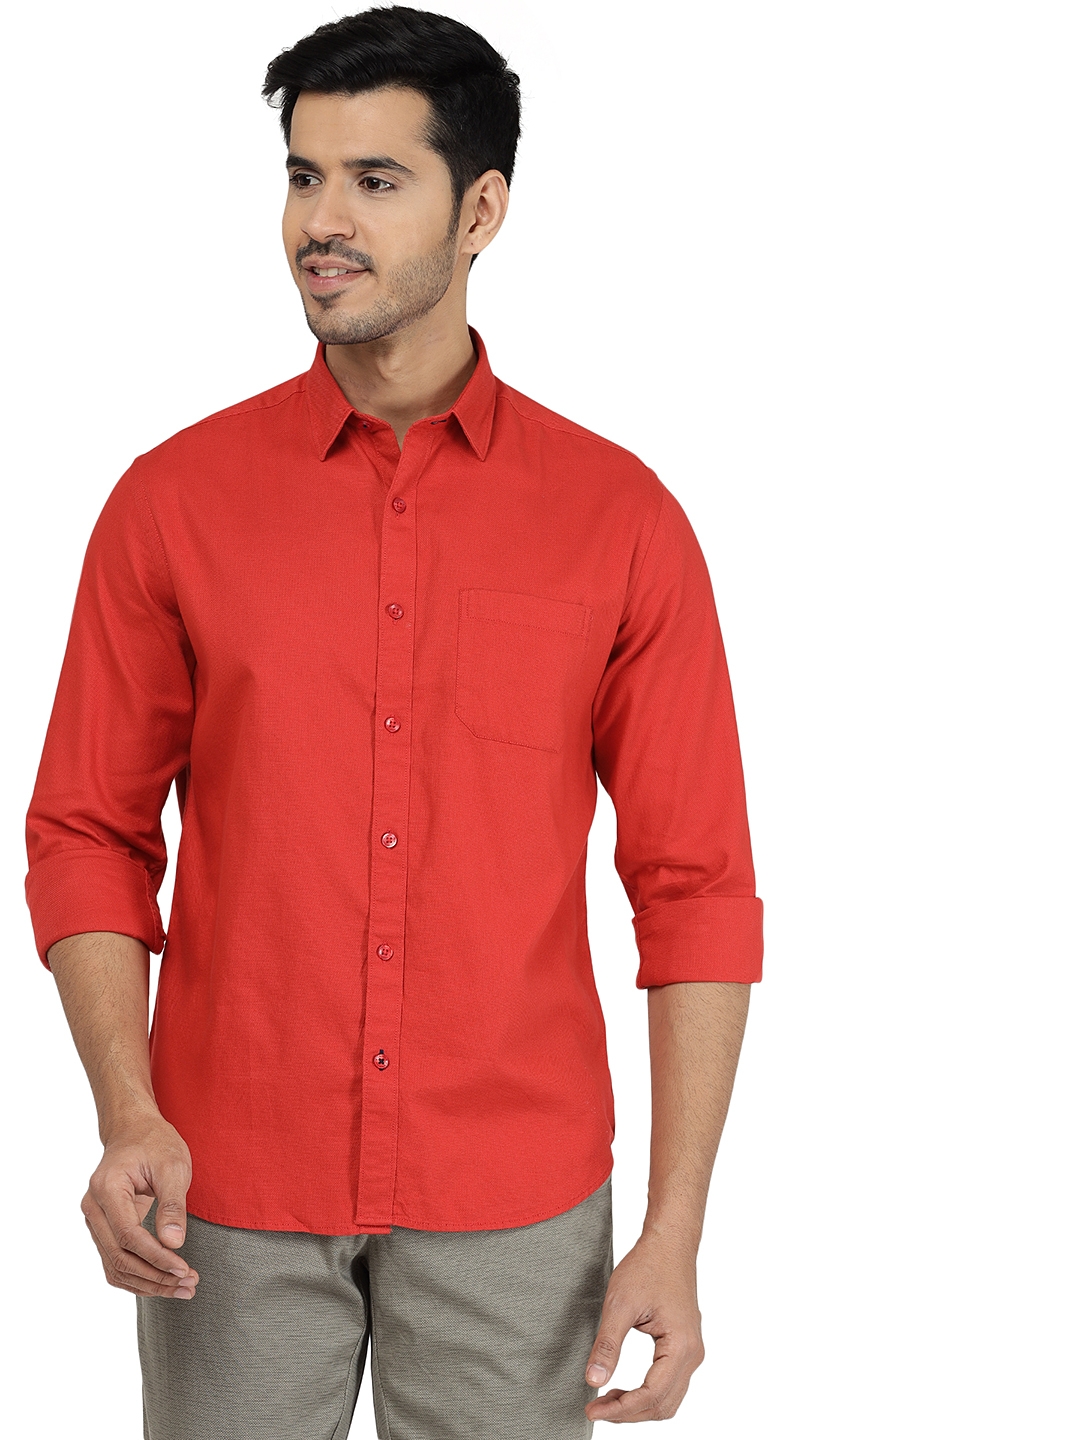 Greenfibre | Paprika Red Solid Classic Fit Casual Shirt | Greenfibre